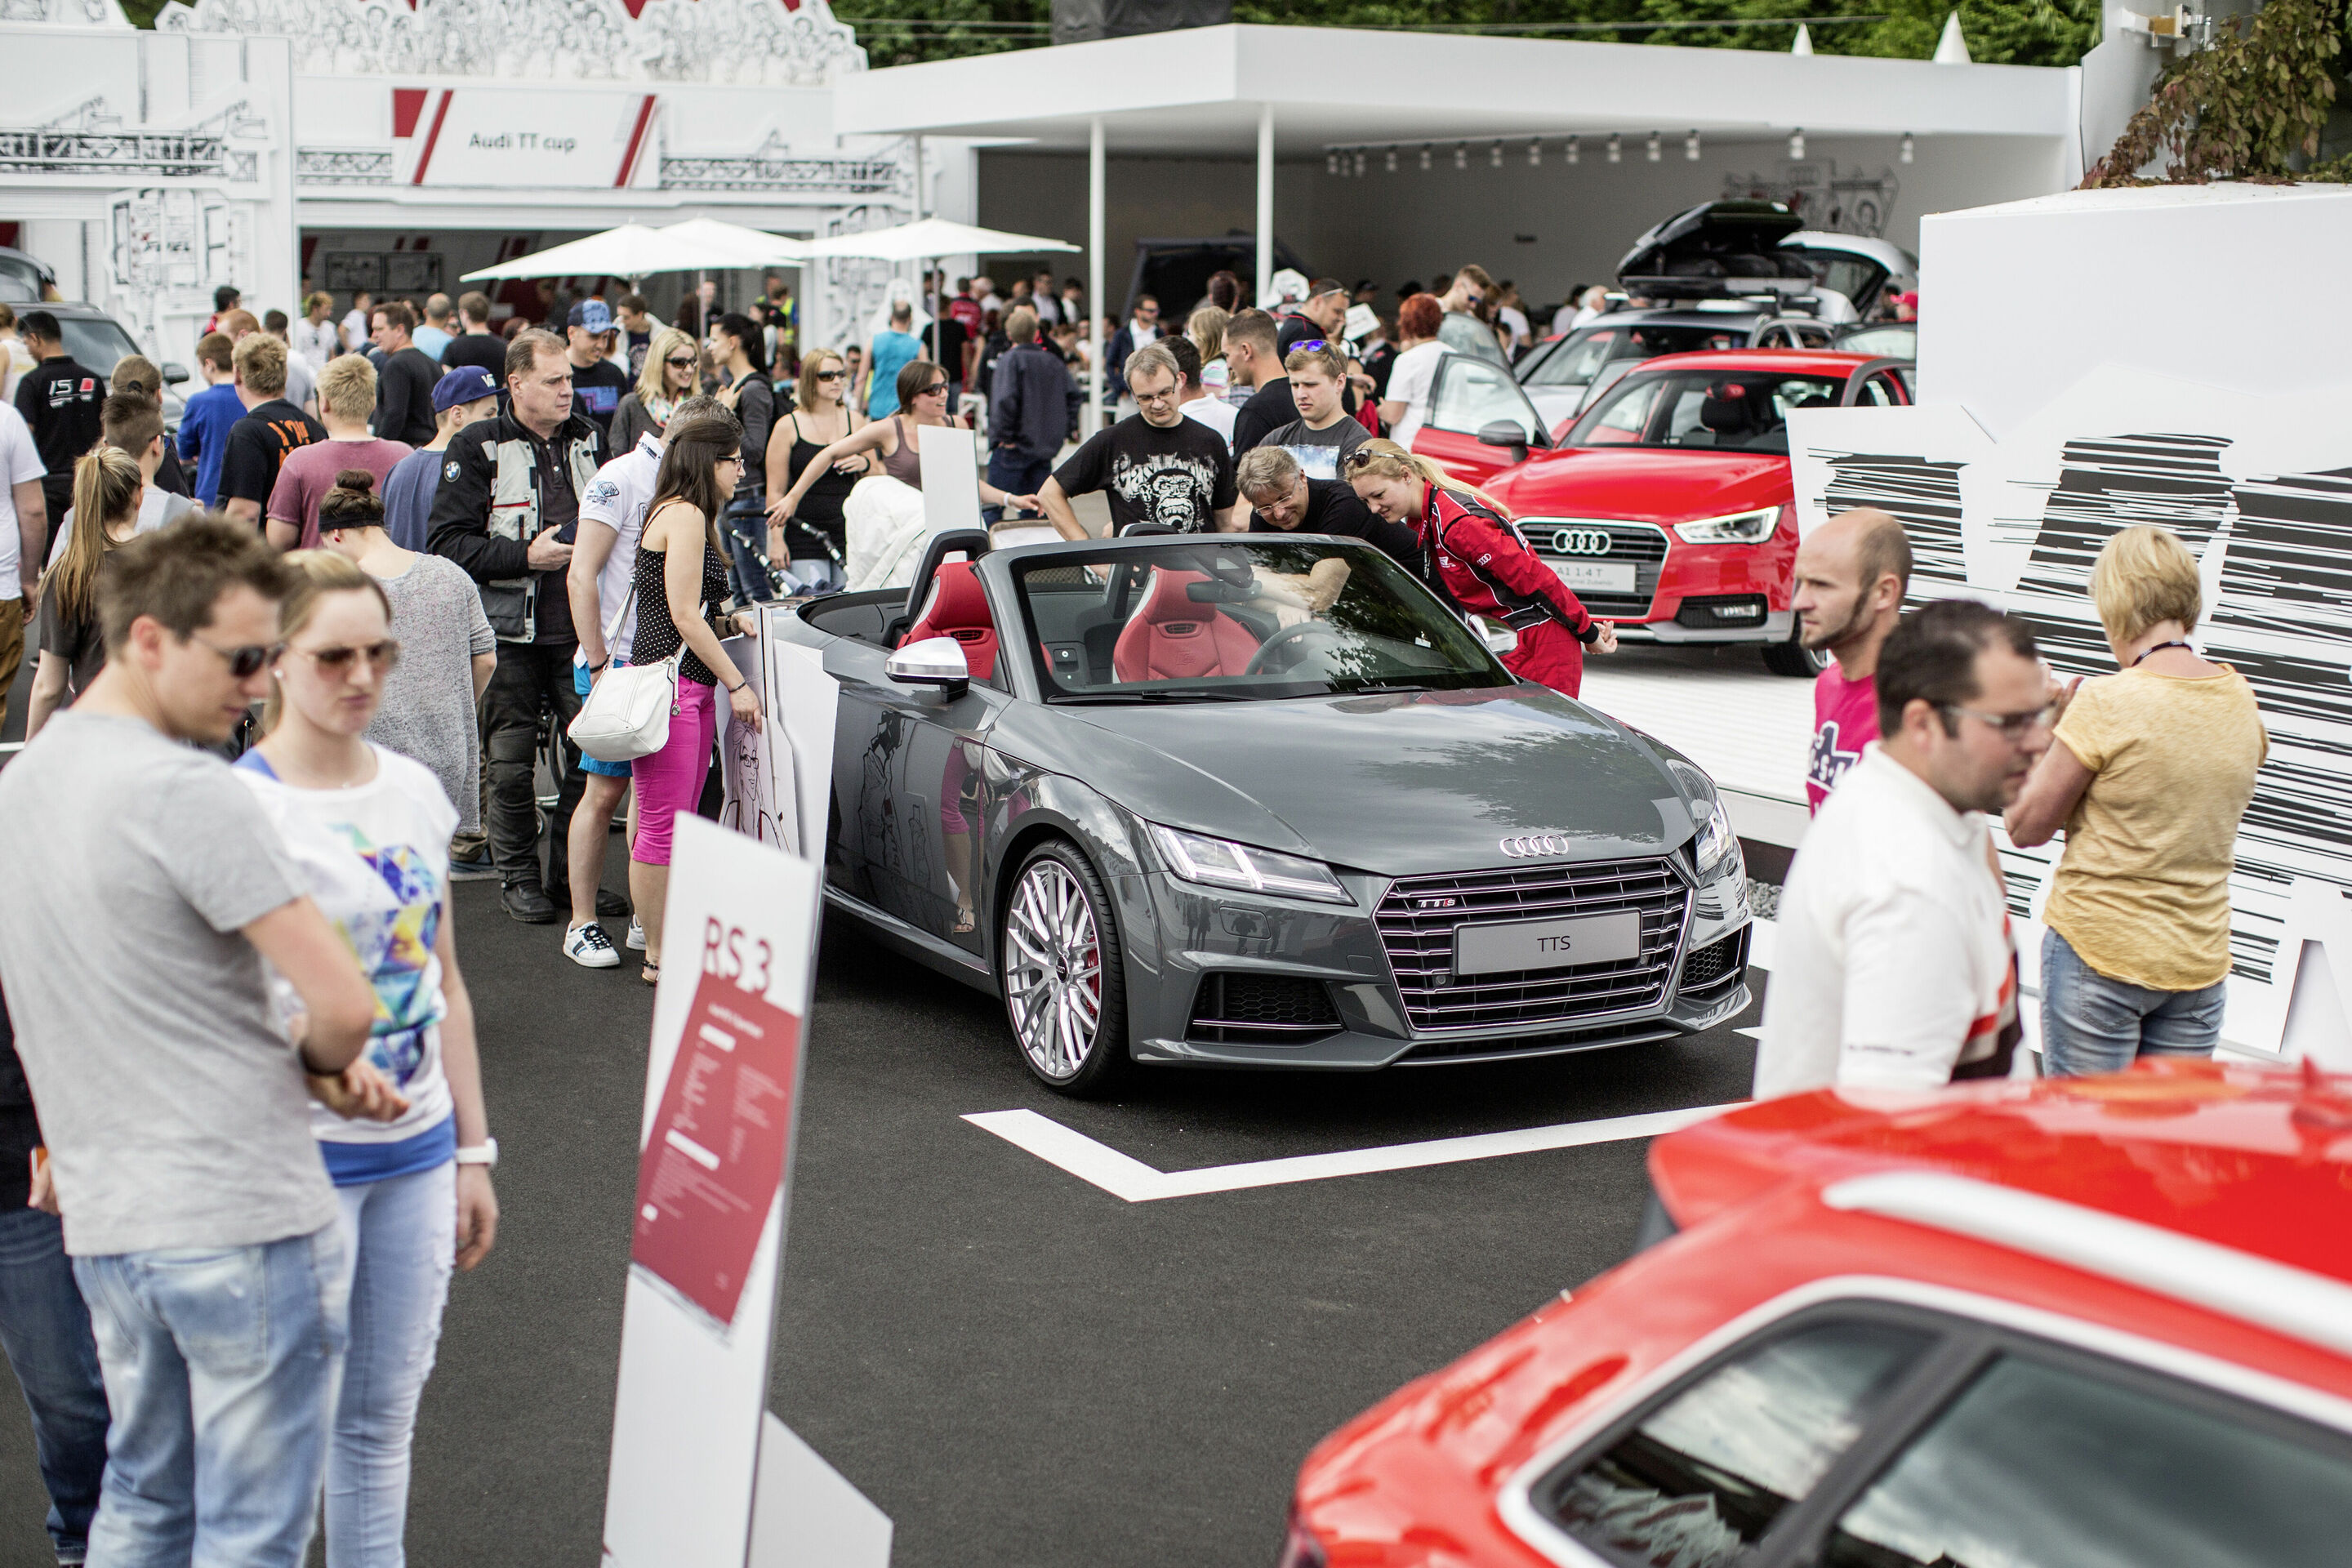 Audi at the 2015 Wörthersee